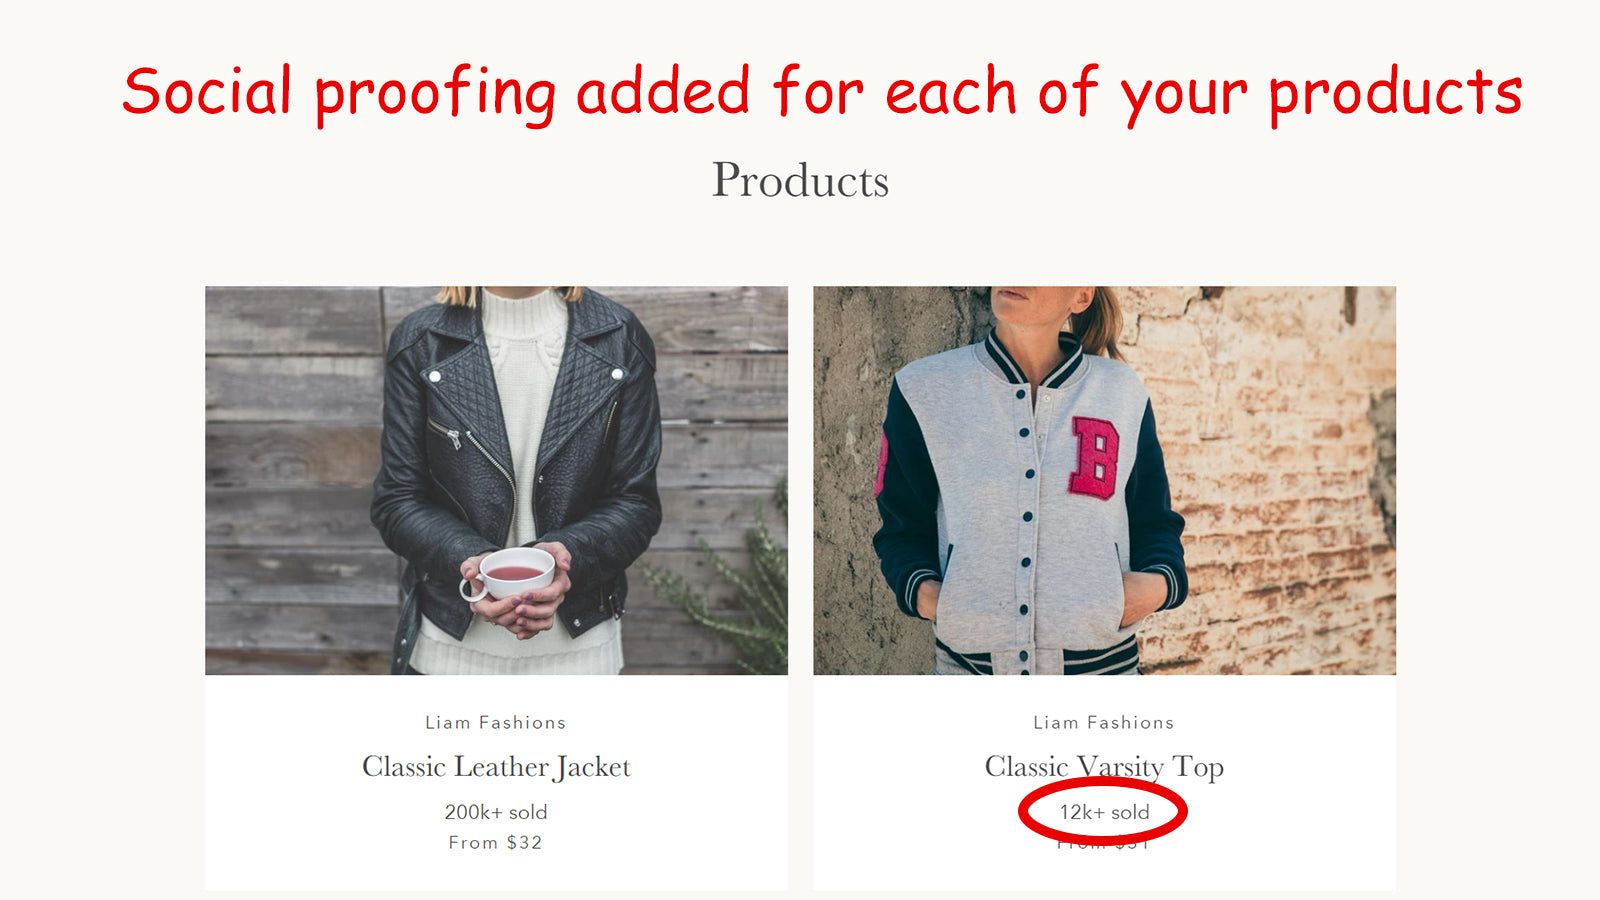 Social proofing added for each of your products